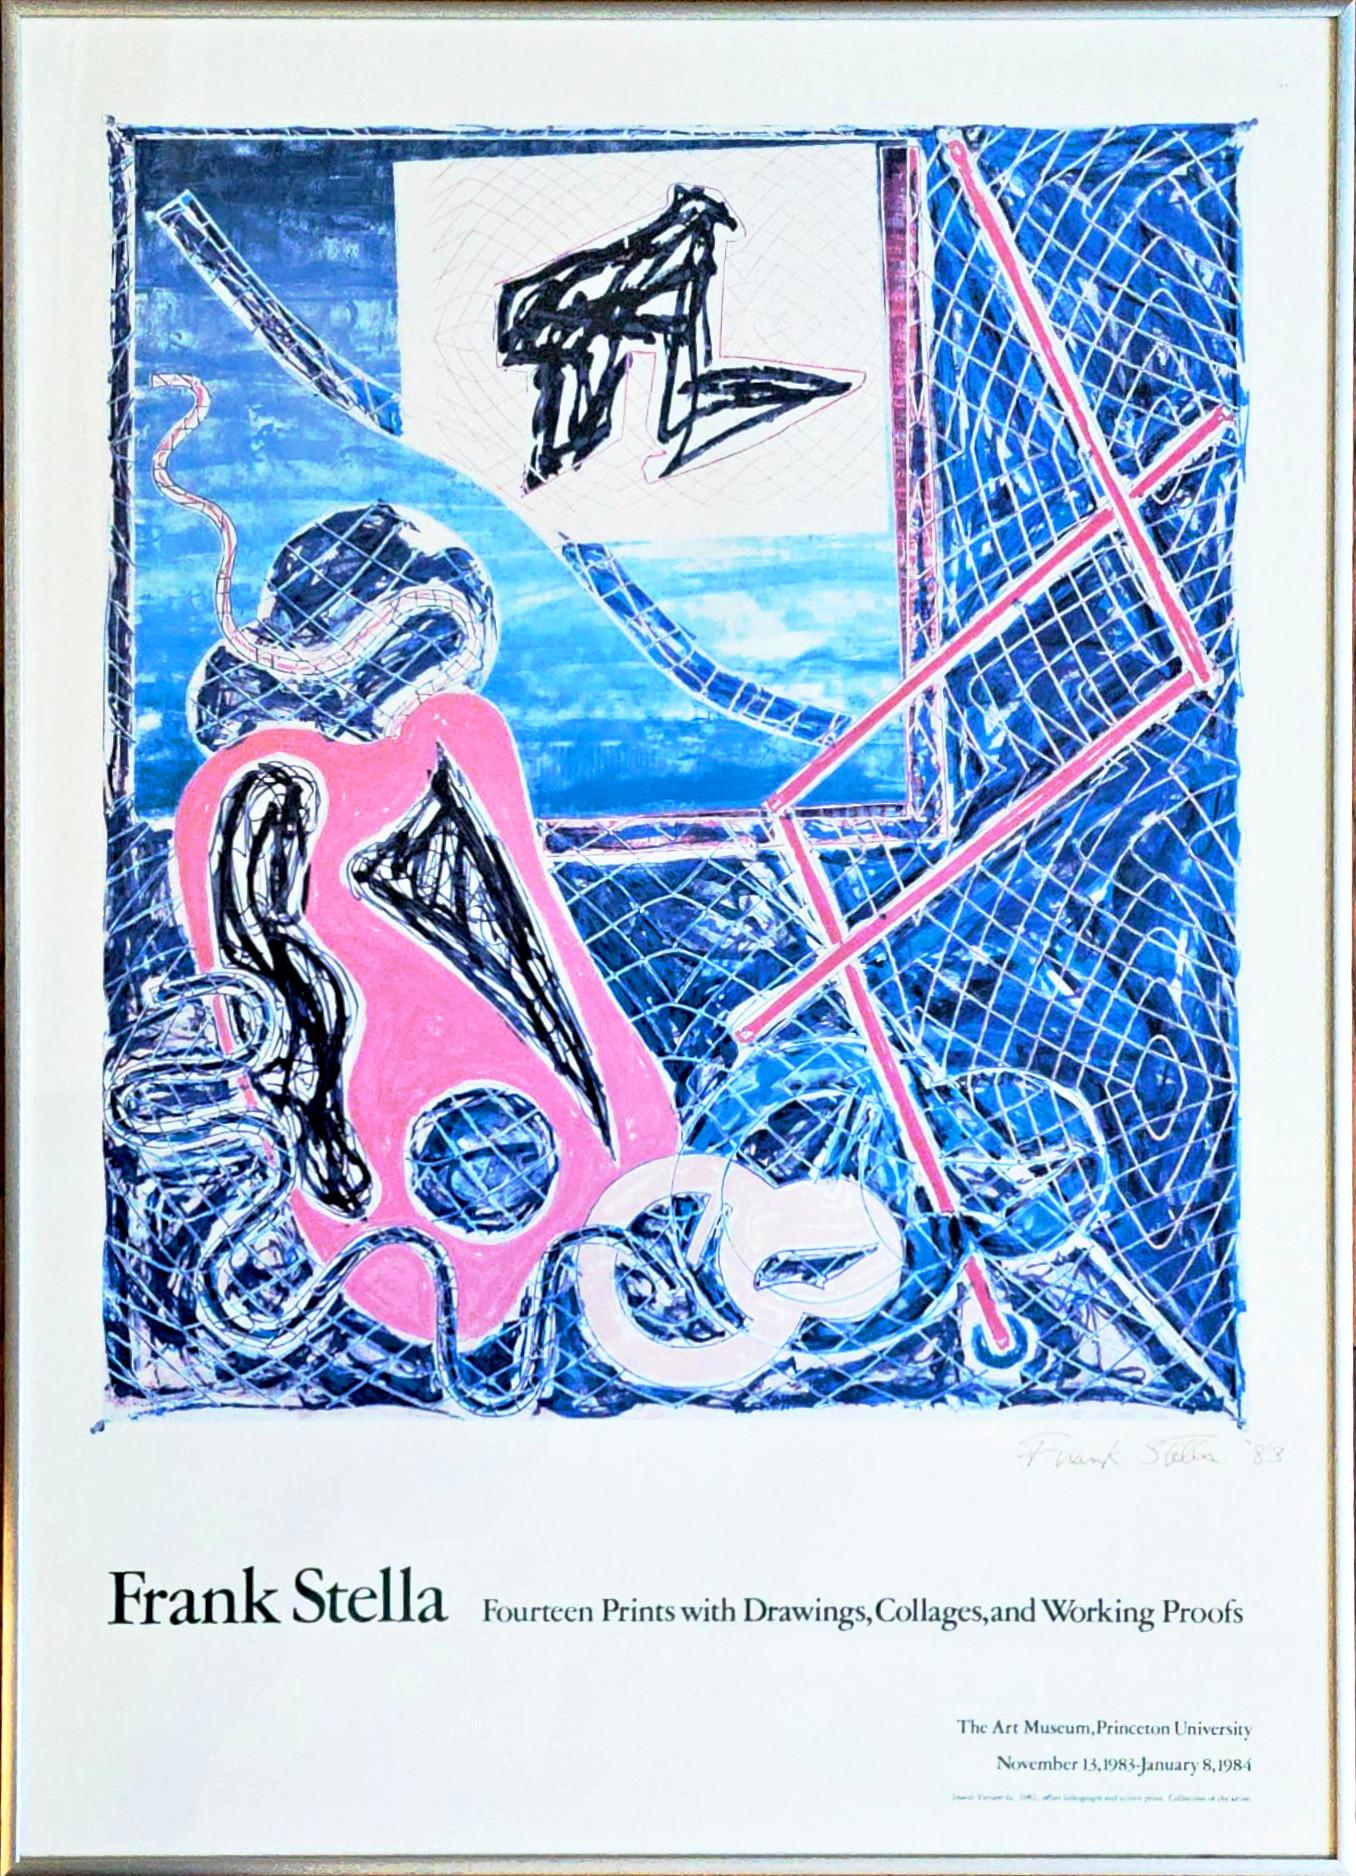 Frank Stella
Princeton Art Museum Poster (Hand signed and dated by Frank Stella), 1983
Offset lithograph poster (hand signed and dated by Frank Stella)
Hand signed and dated '83 by Frank Stella on the front
Frame included: held in the original